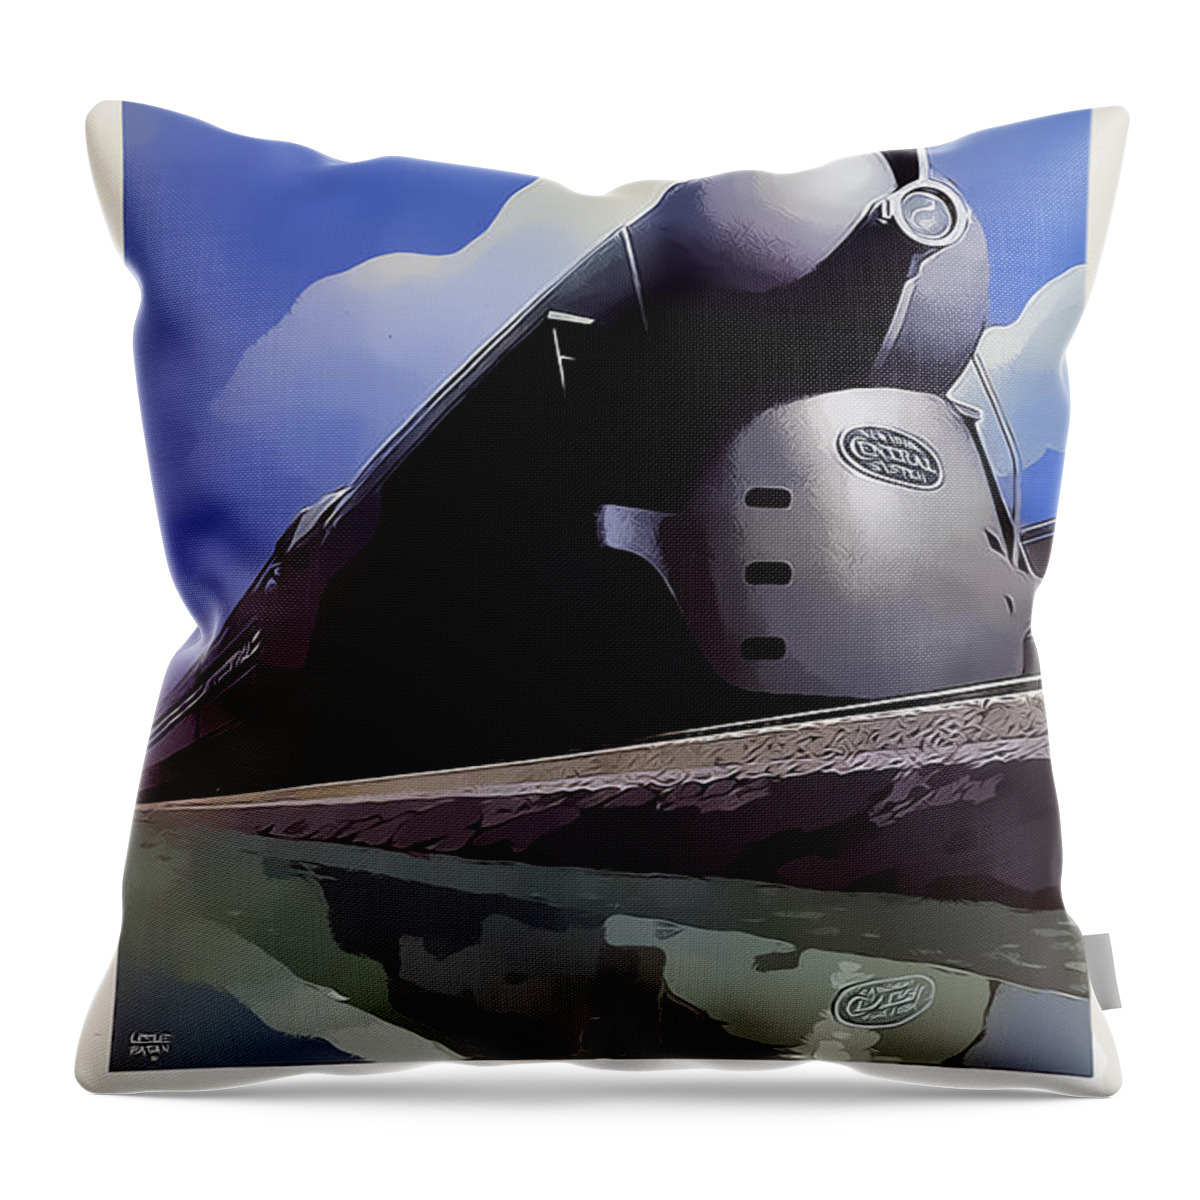 20th Century Limited Throw Pillow featuring the digital art 20th Century Limited by Chuck Staley